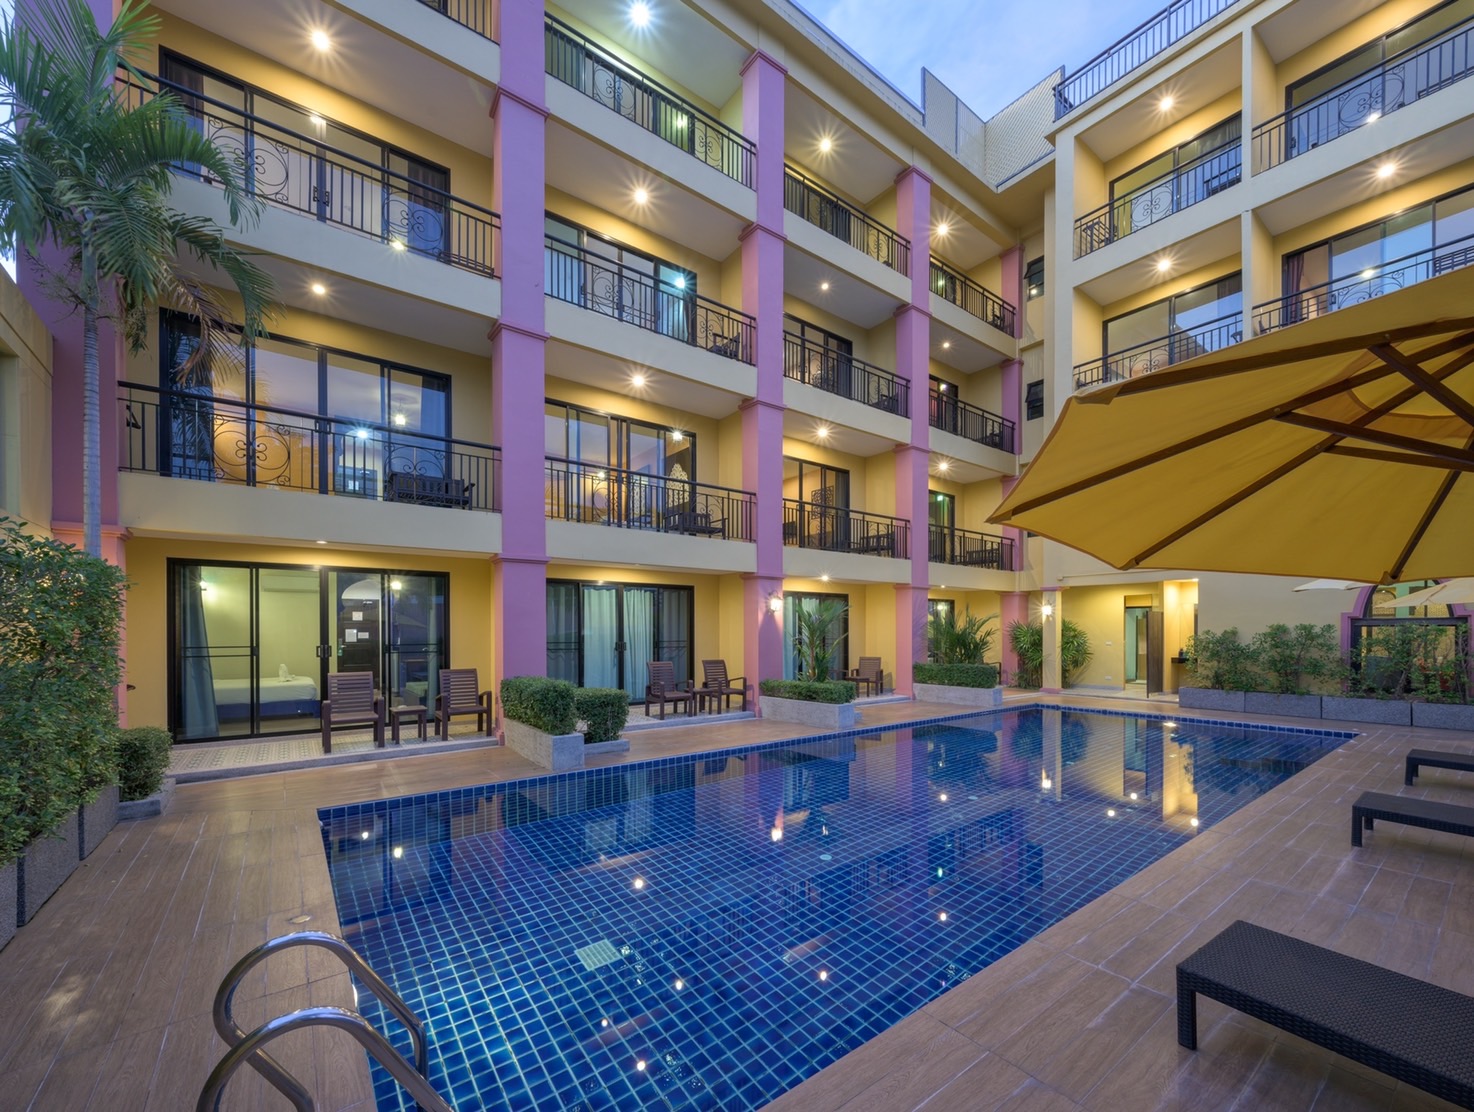 Hotel for sale in Phuket with hotel license